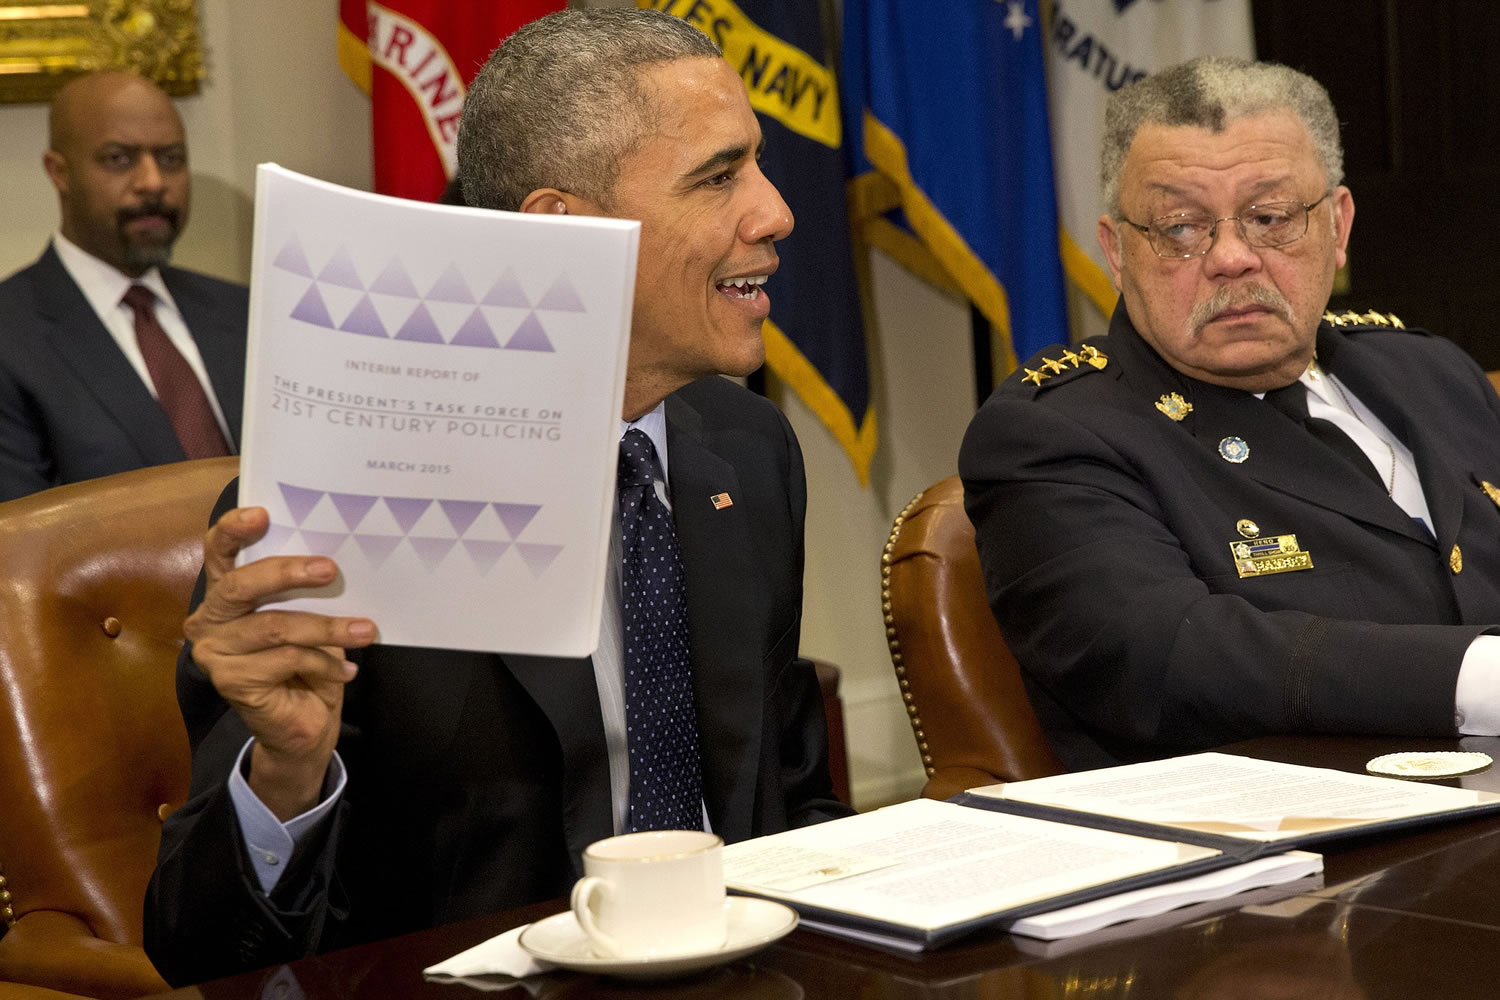 Philadelphia Police Commissioner Charles Ramsey watches at right as President Barack Obama holds up a copy of the interim report of the President's Task Force on 21st Century Policing on Monday during a meeting with members of the task force in the Roosevelt Room of the White House in Washington.